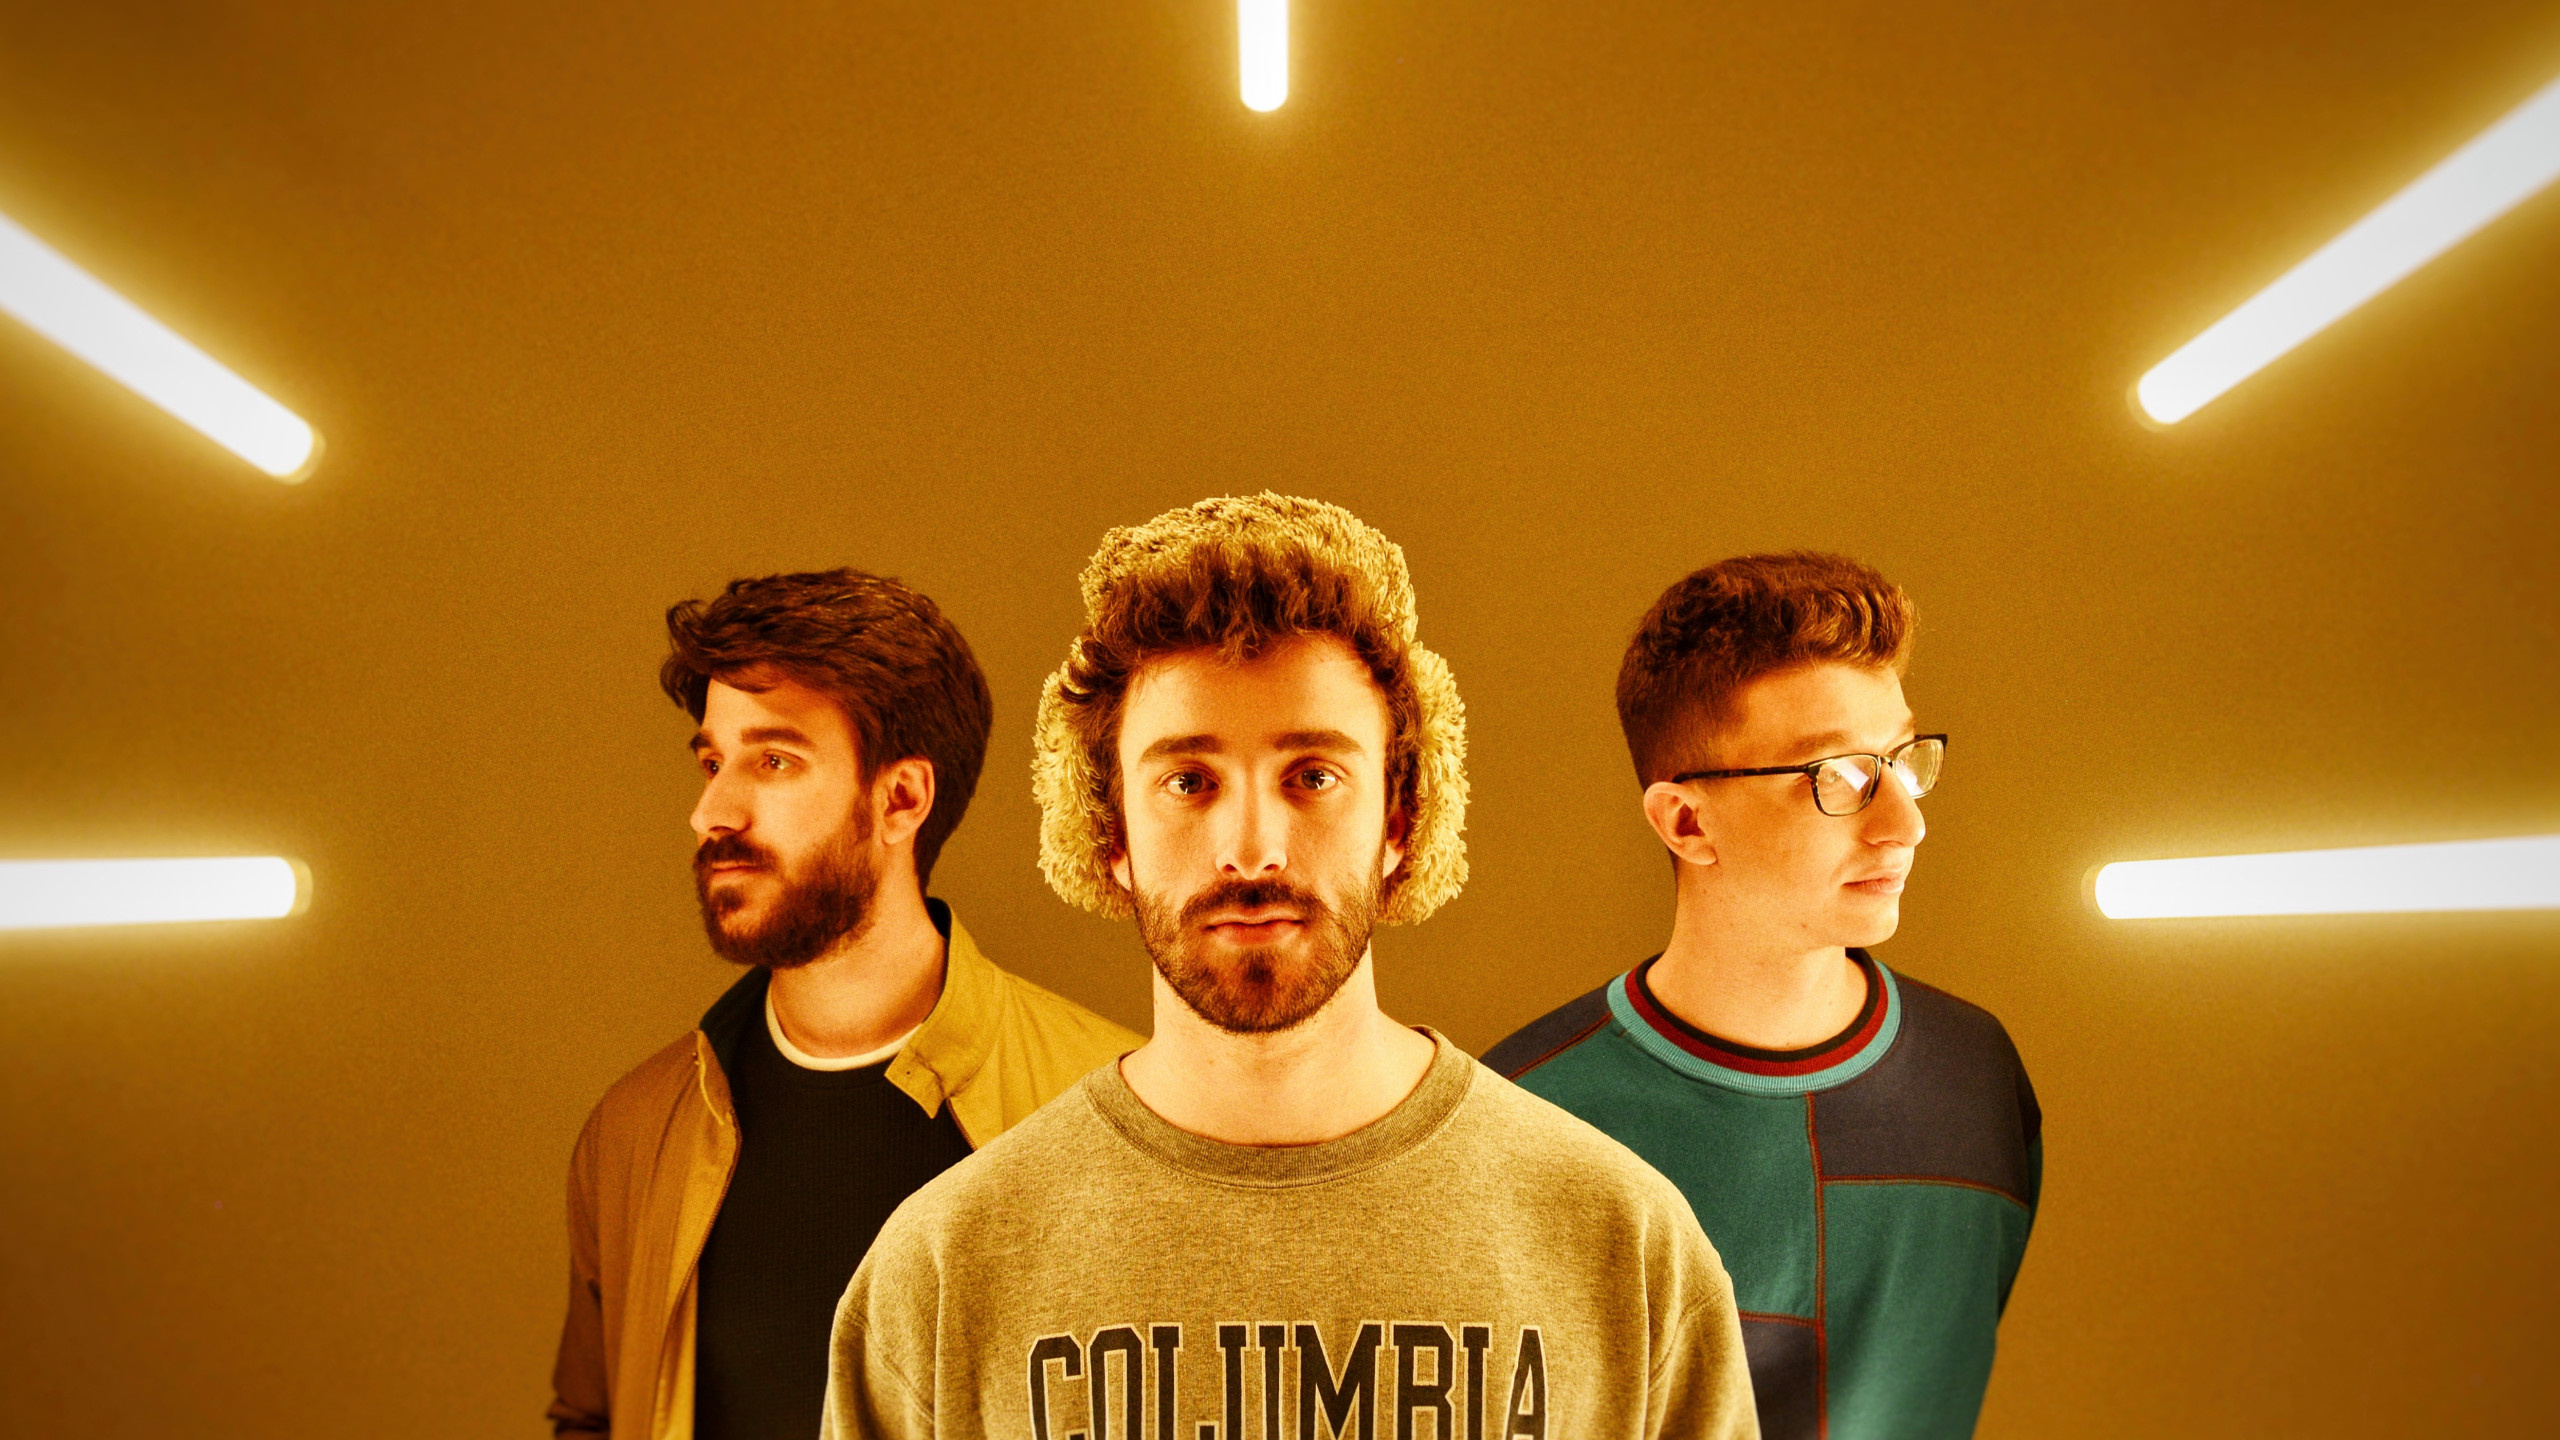 AJR computer wallpaper, Stand out, Personalize your device, Creative visuals, 2560x1440 HD Desktop